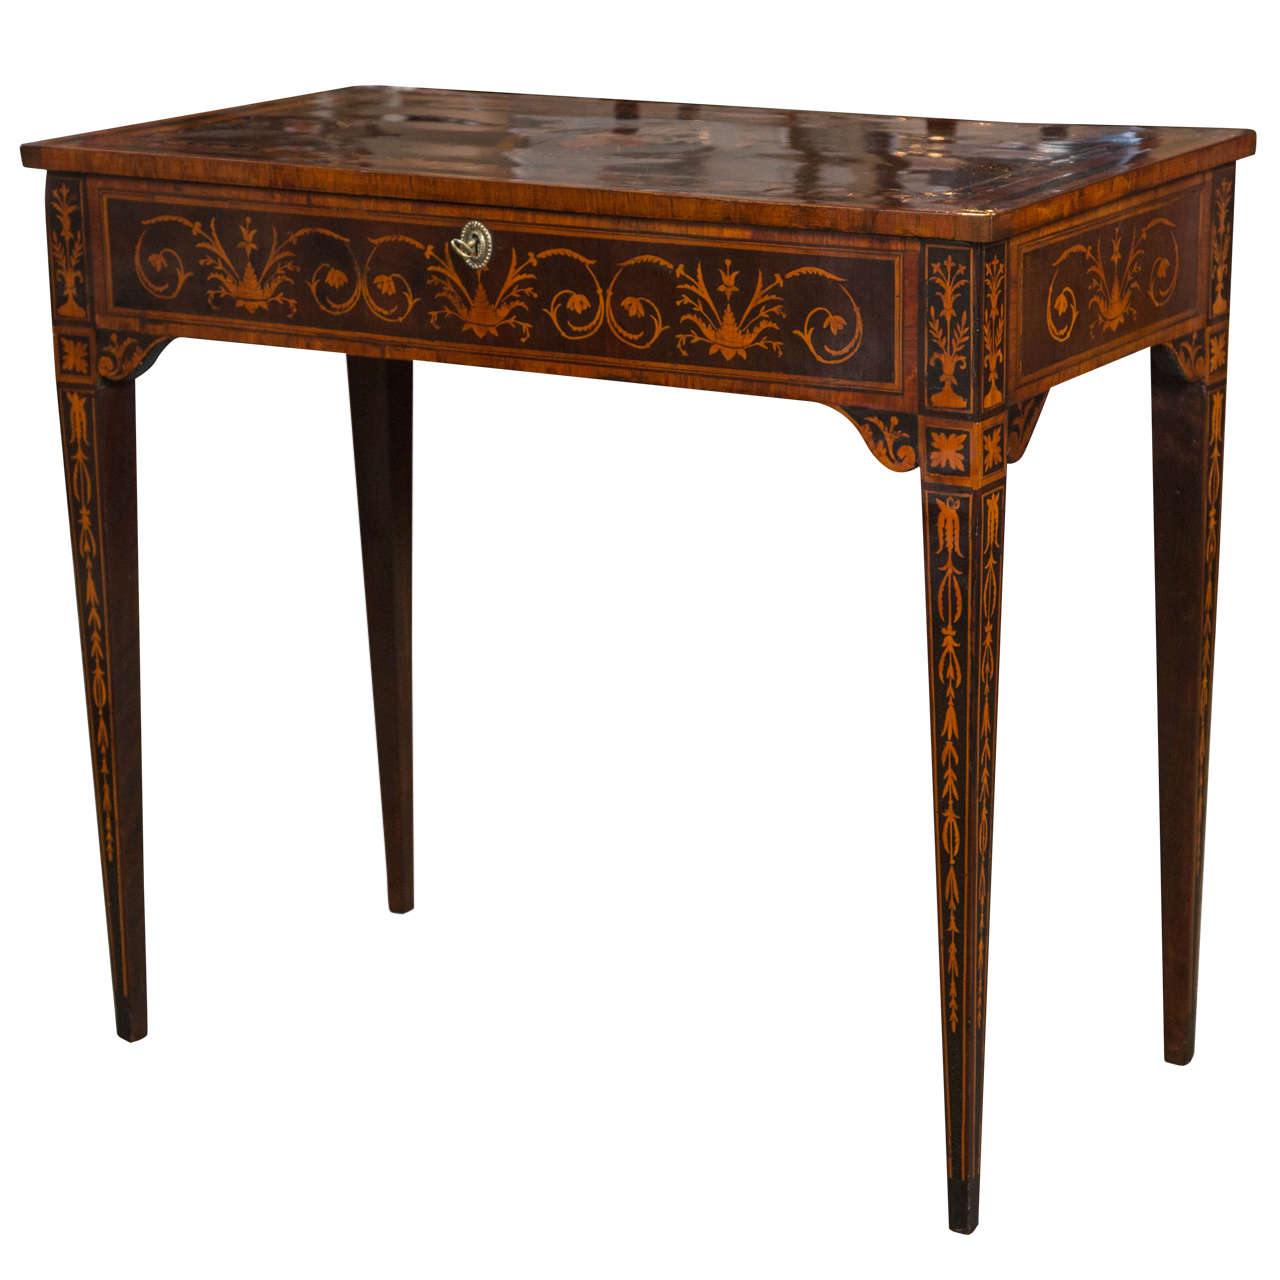 Italian Marquetry Work Table